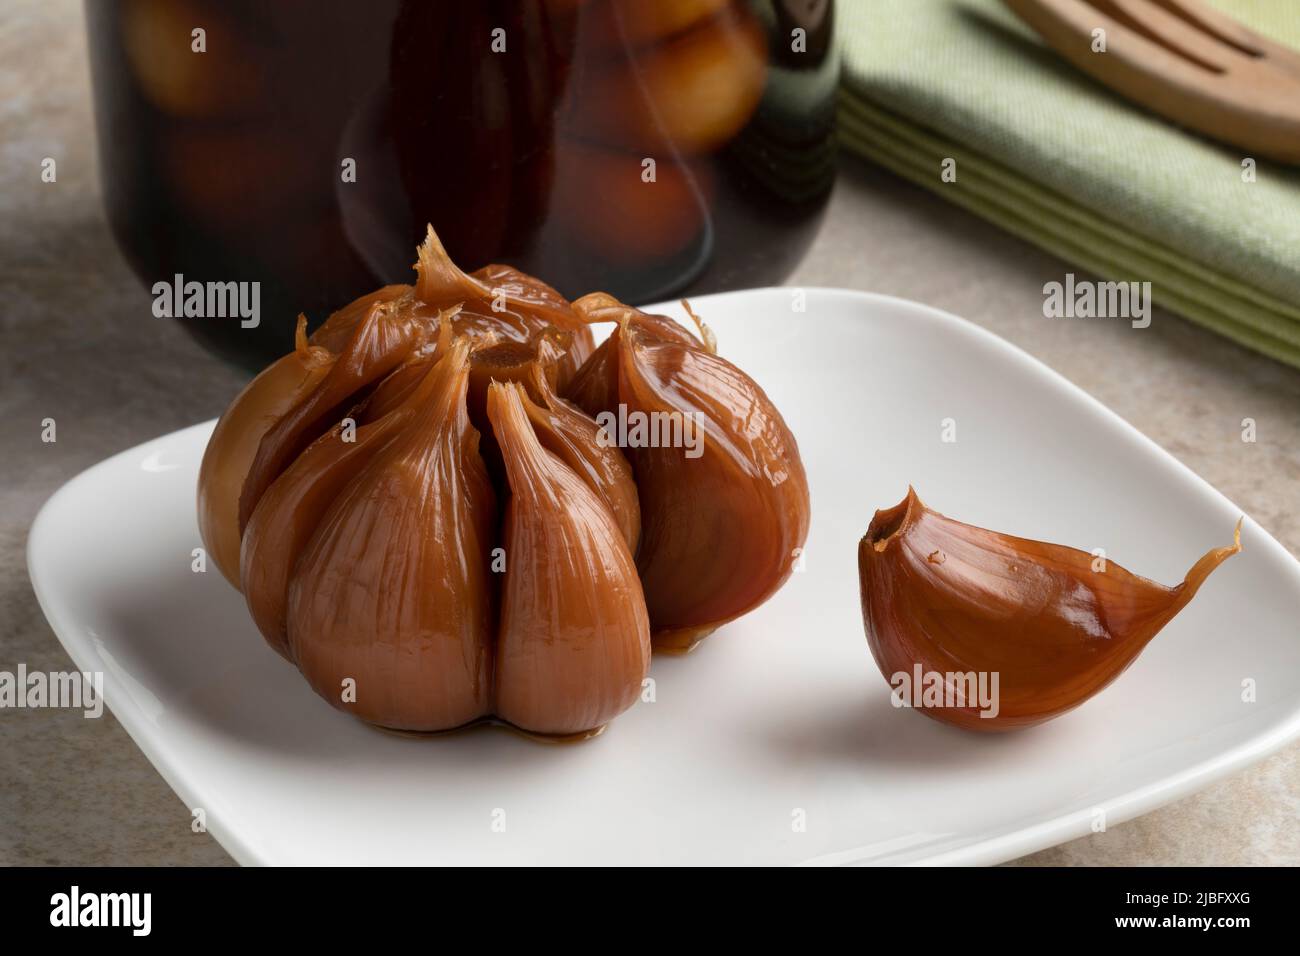 Plate with a pickled garlic bulb and a clove close up Stock Photo